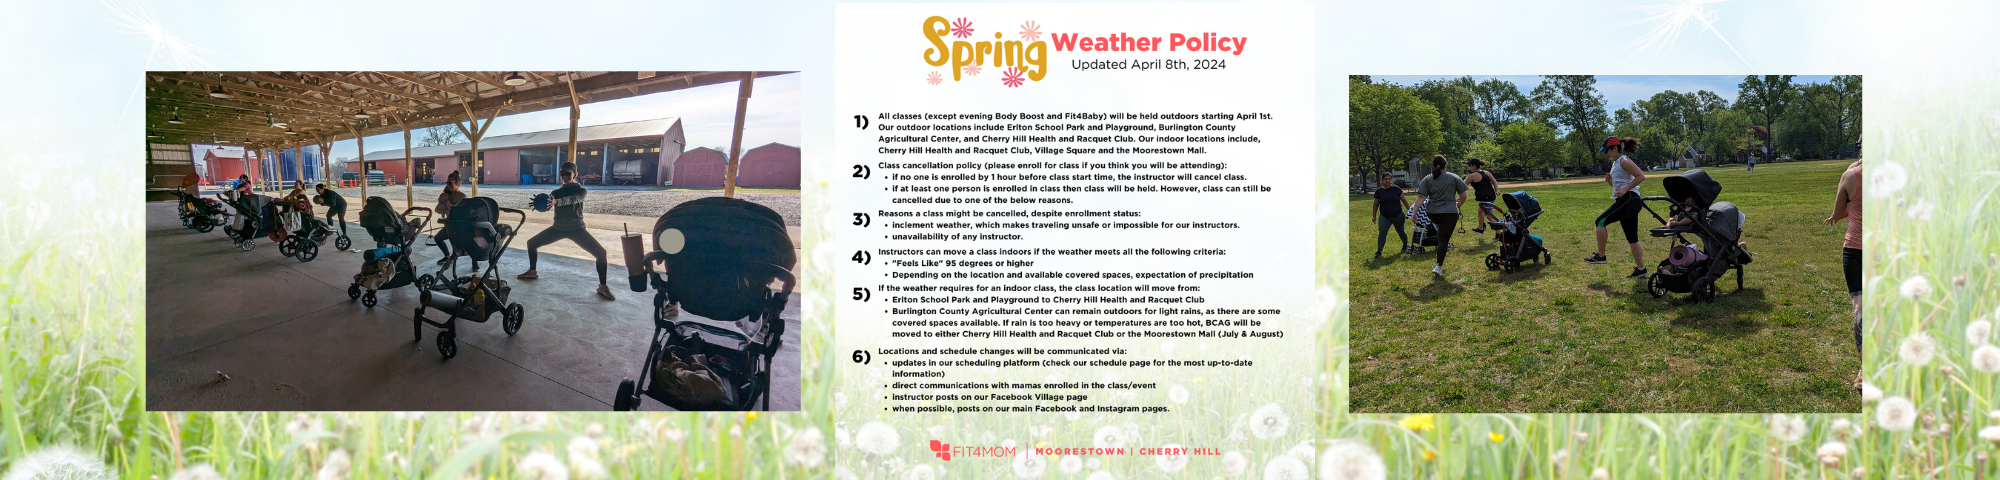 Weather Policy Sched Page V1 - update 1-1-24.png